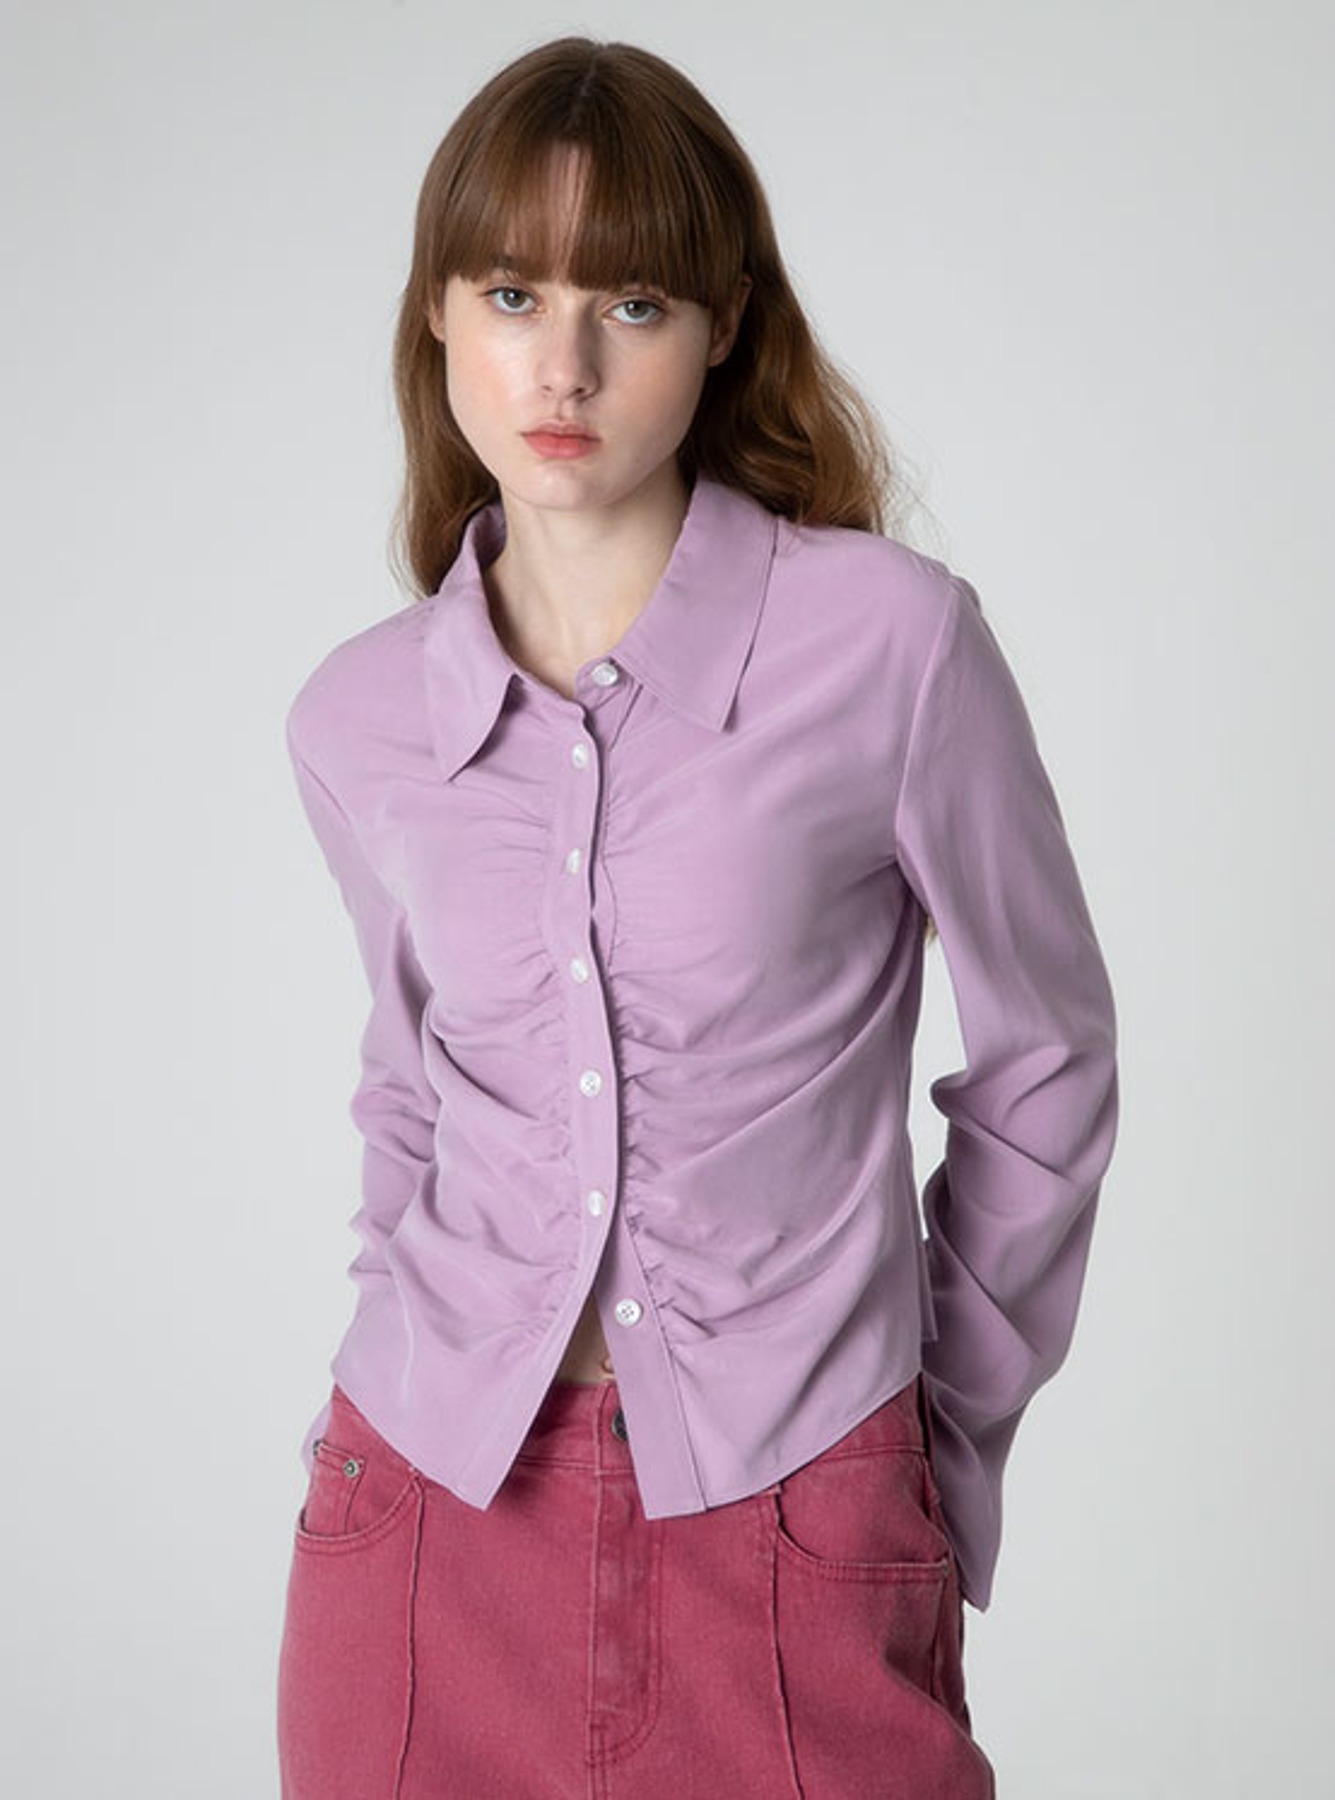 Front Shirring Blouse in Lavender VW2AB347-50